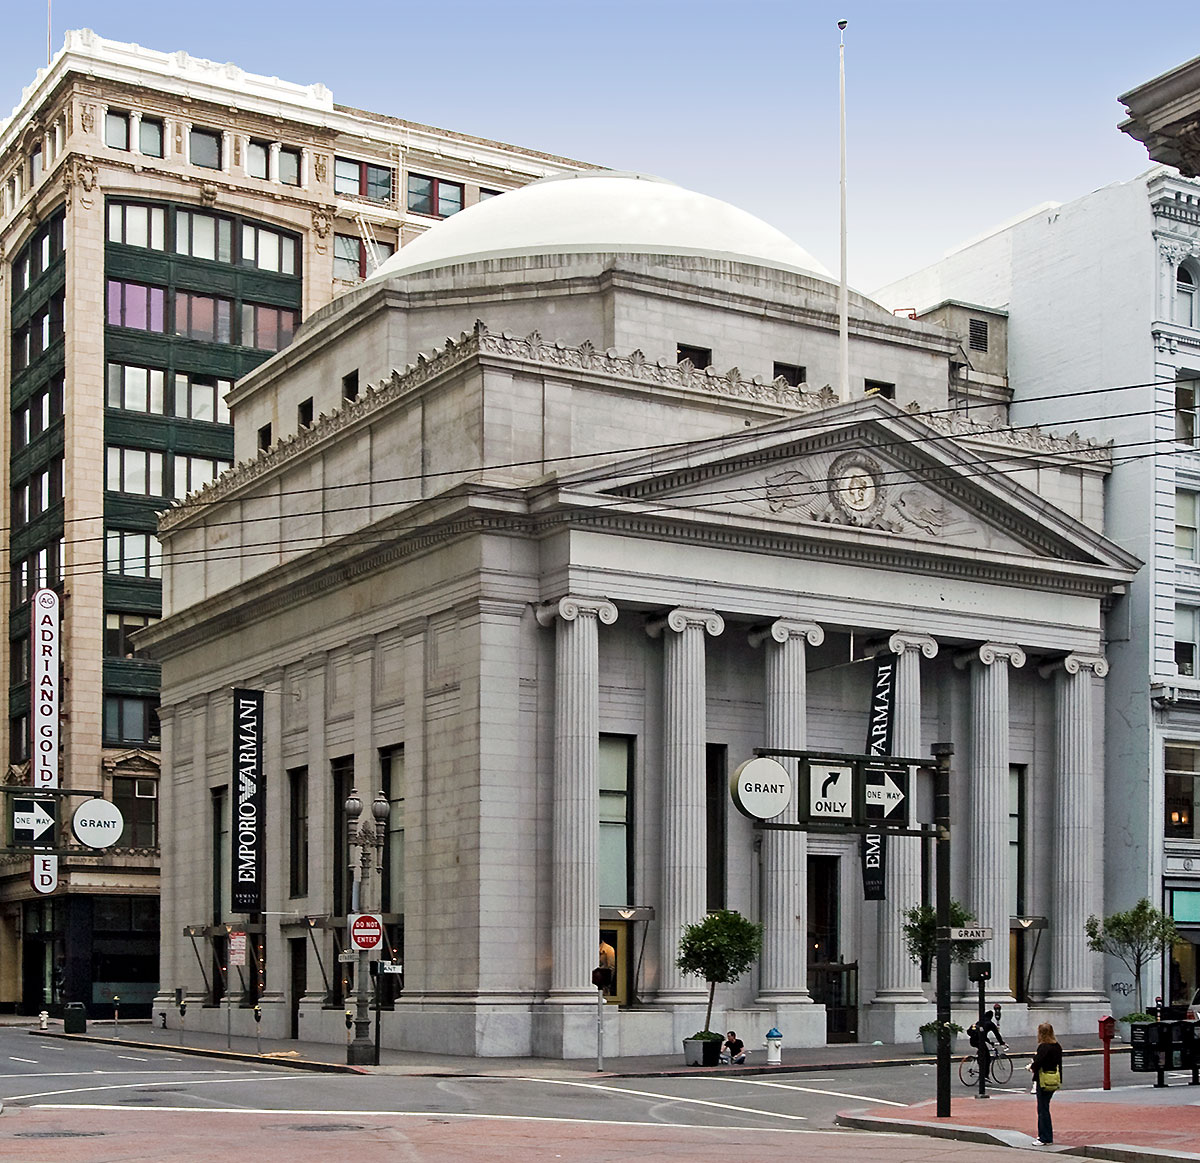 The Savings Union Bank was designed by Bliss & Faville and built in 1910.